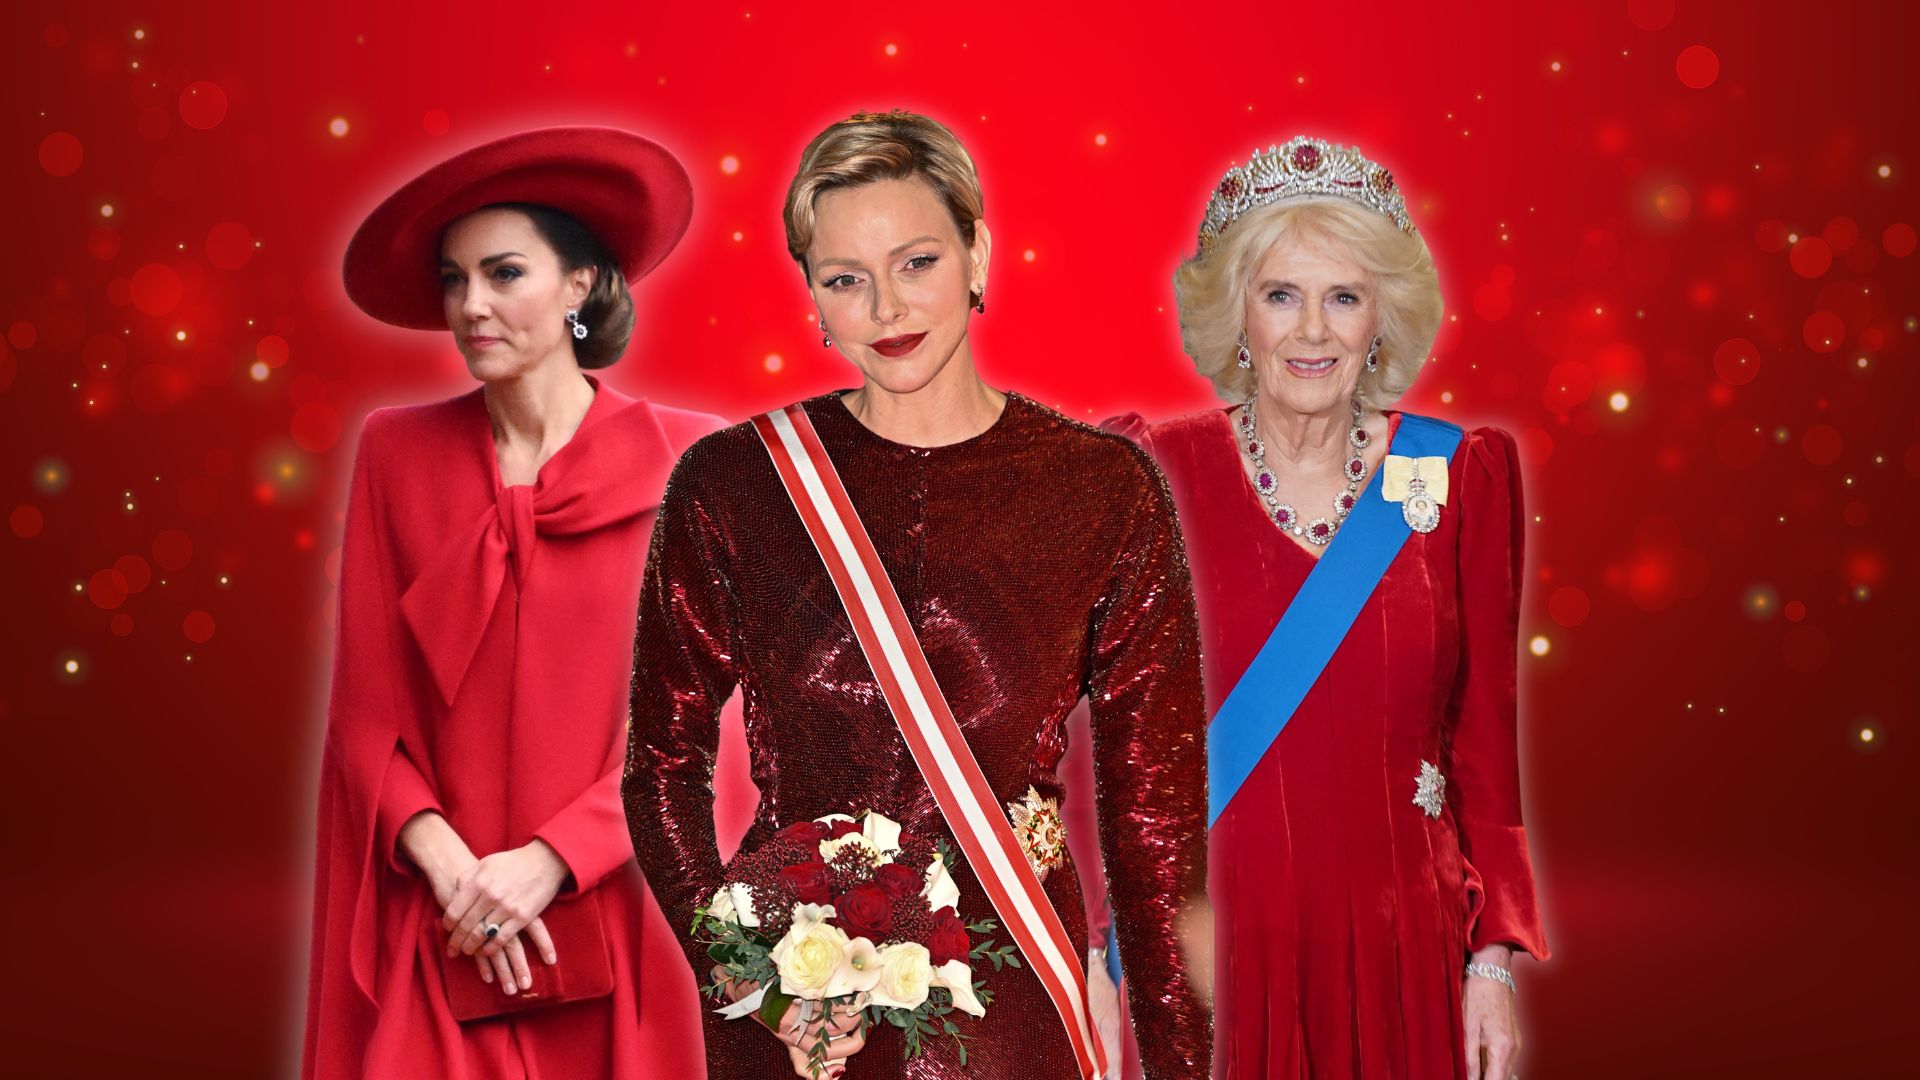 Princess of Wales, Princess Charlene and Queen Camilla wearing red